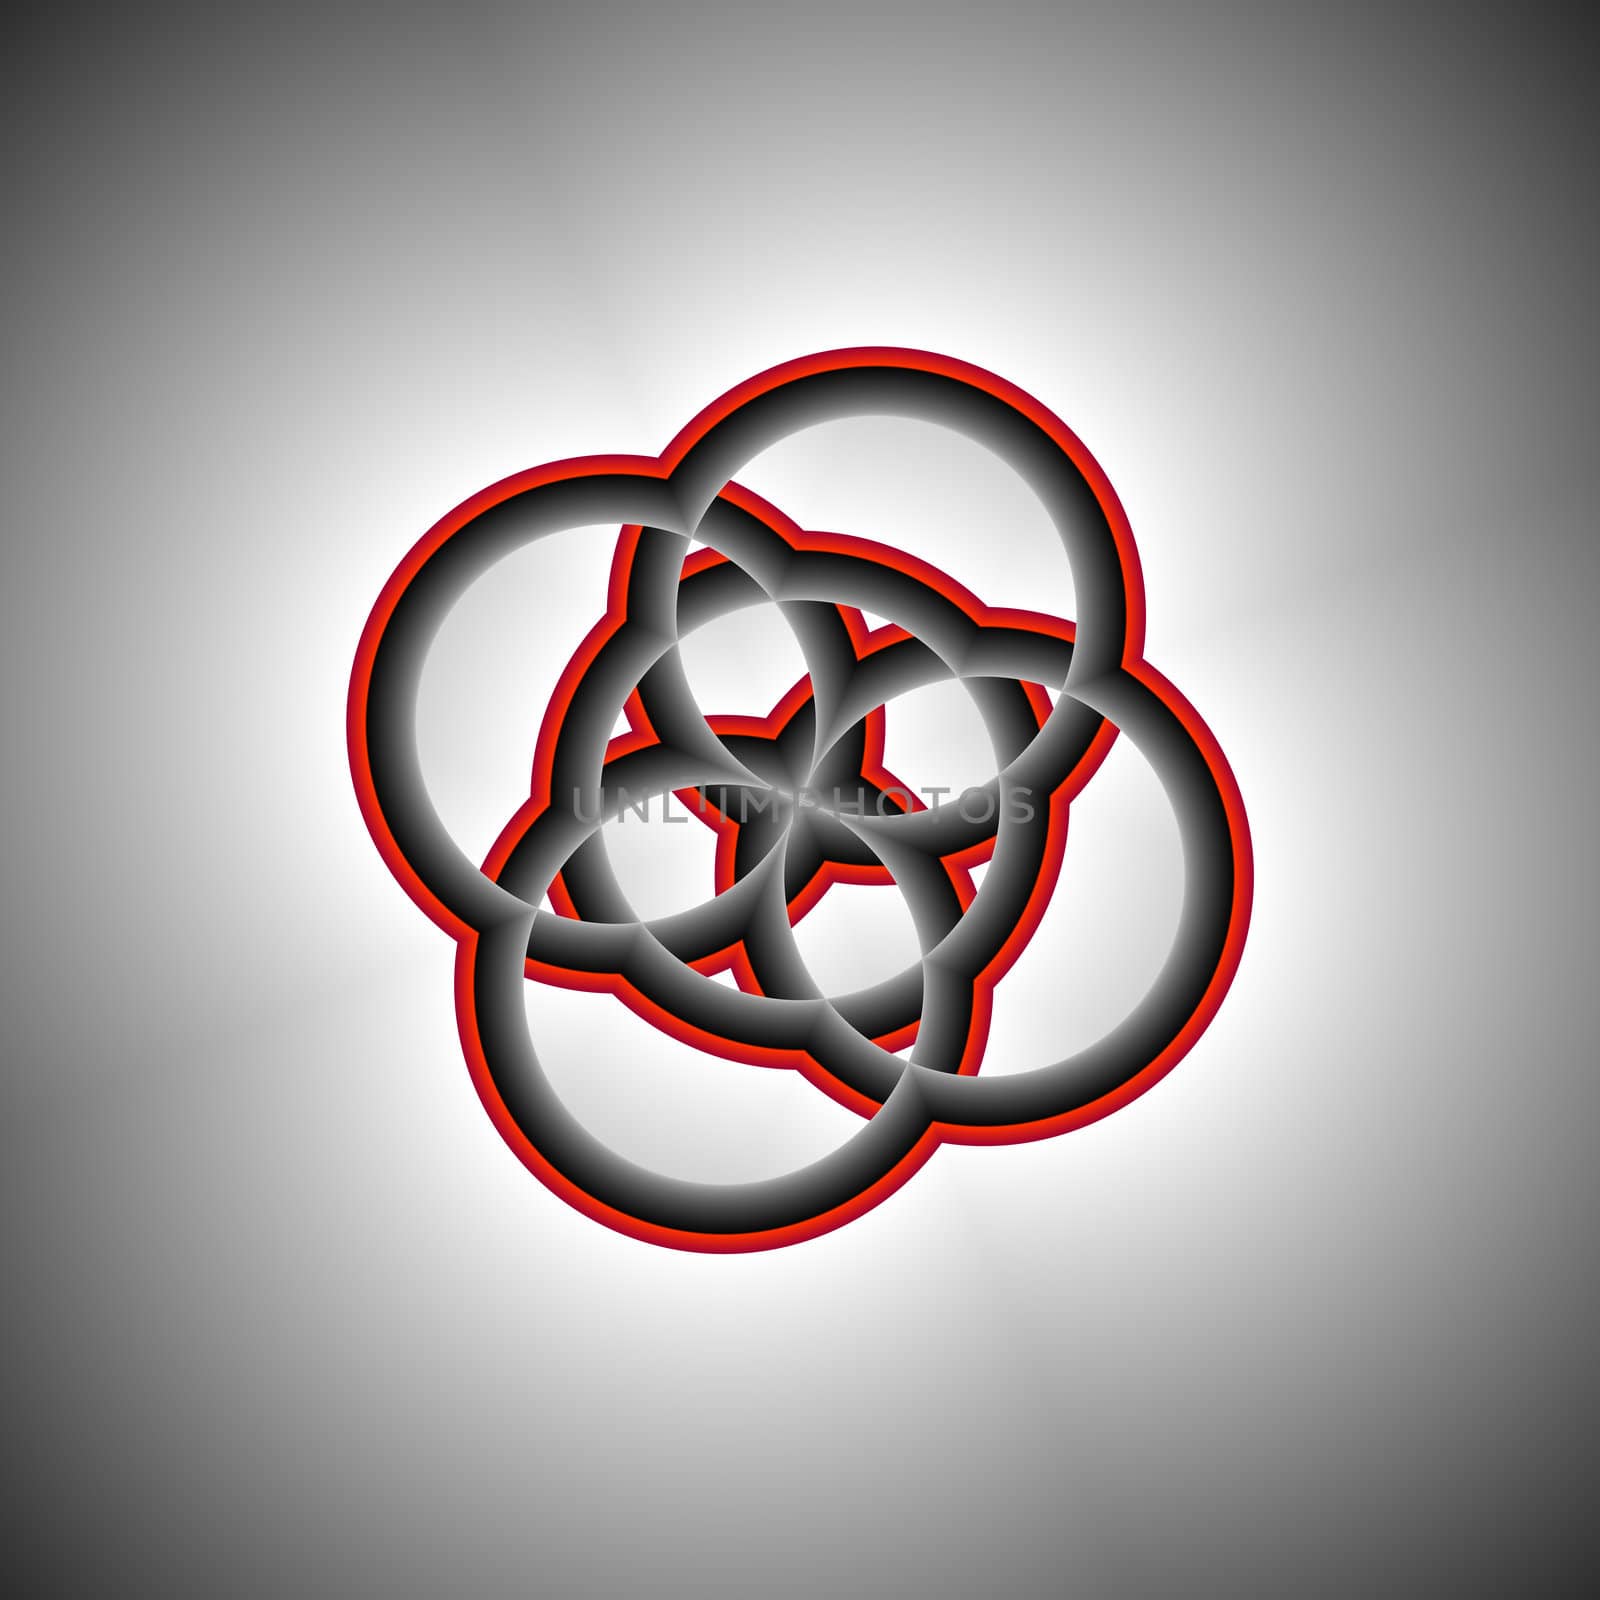 A fractal made up of five overlapping circles. it is done in shades of red and gray on a gray gradient background.